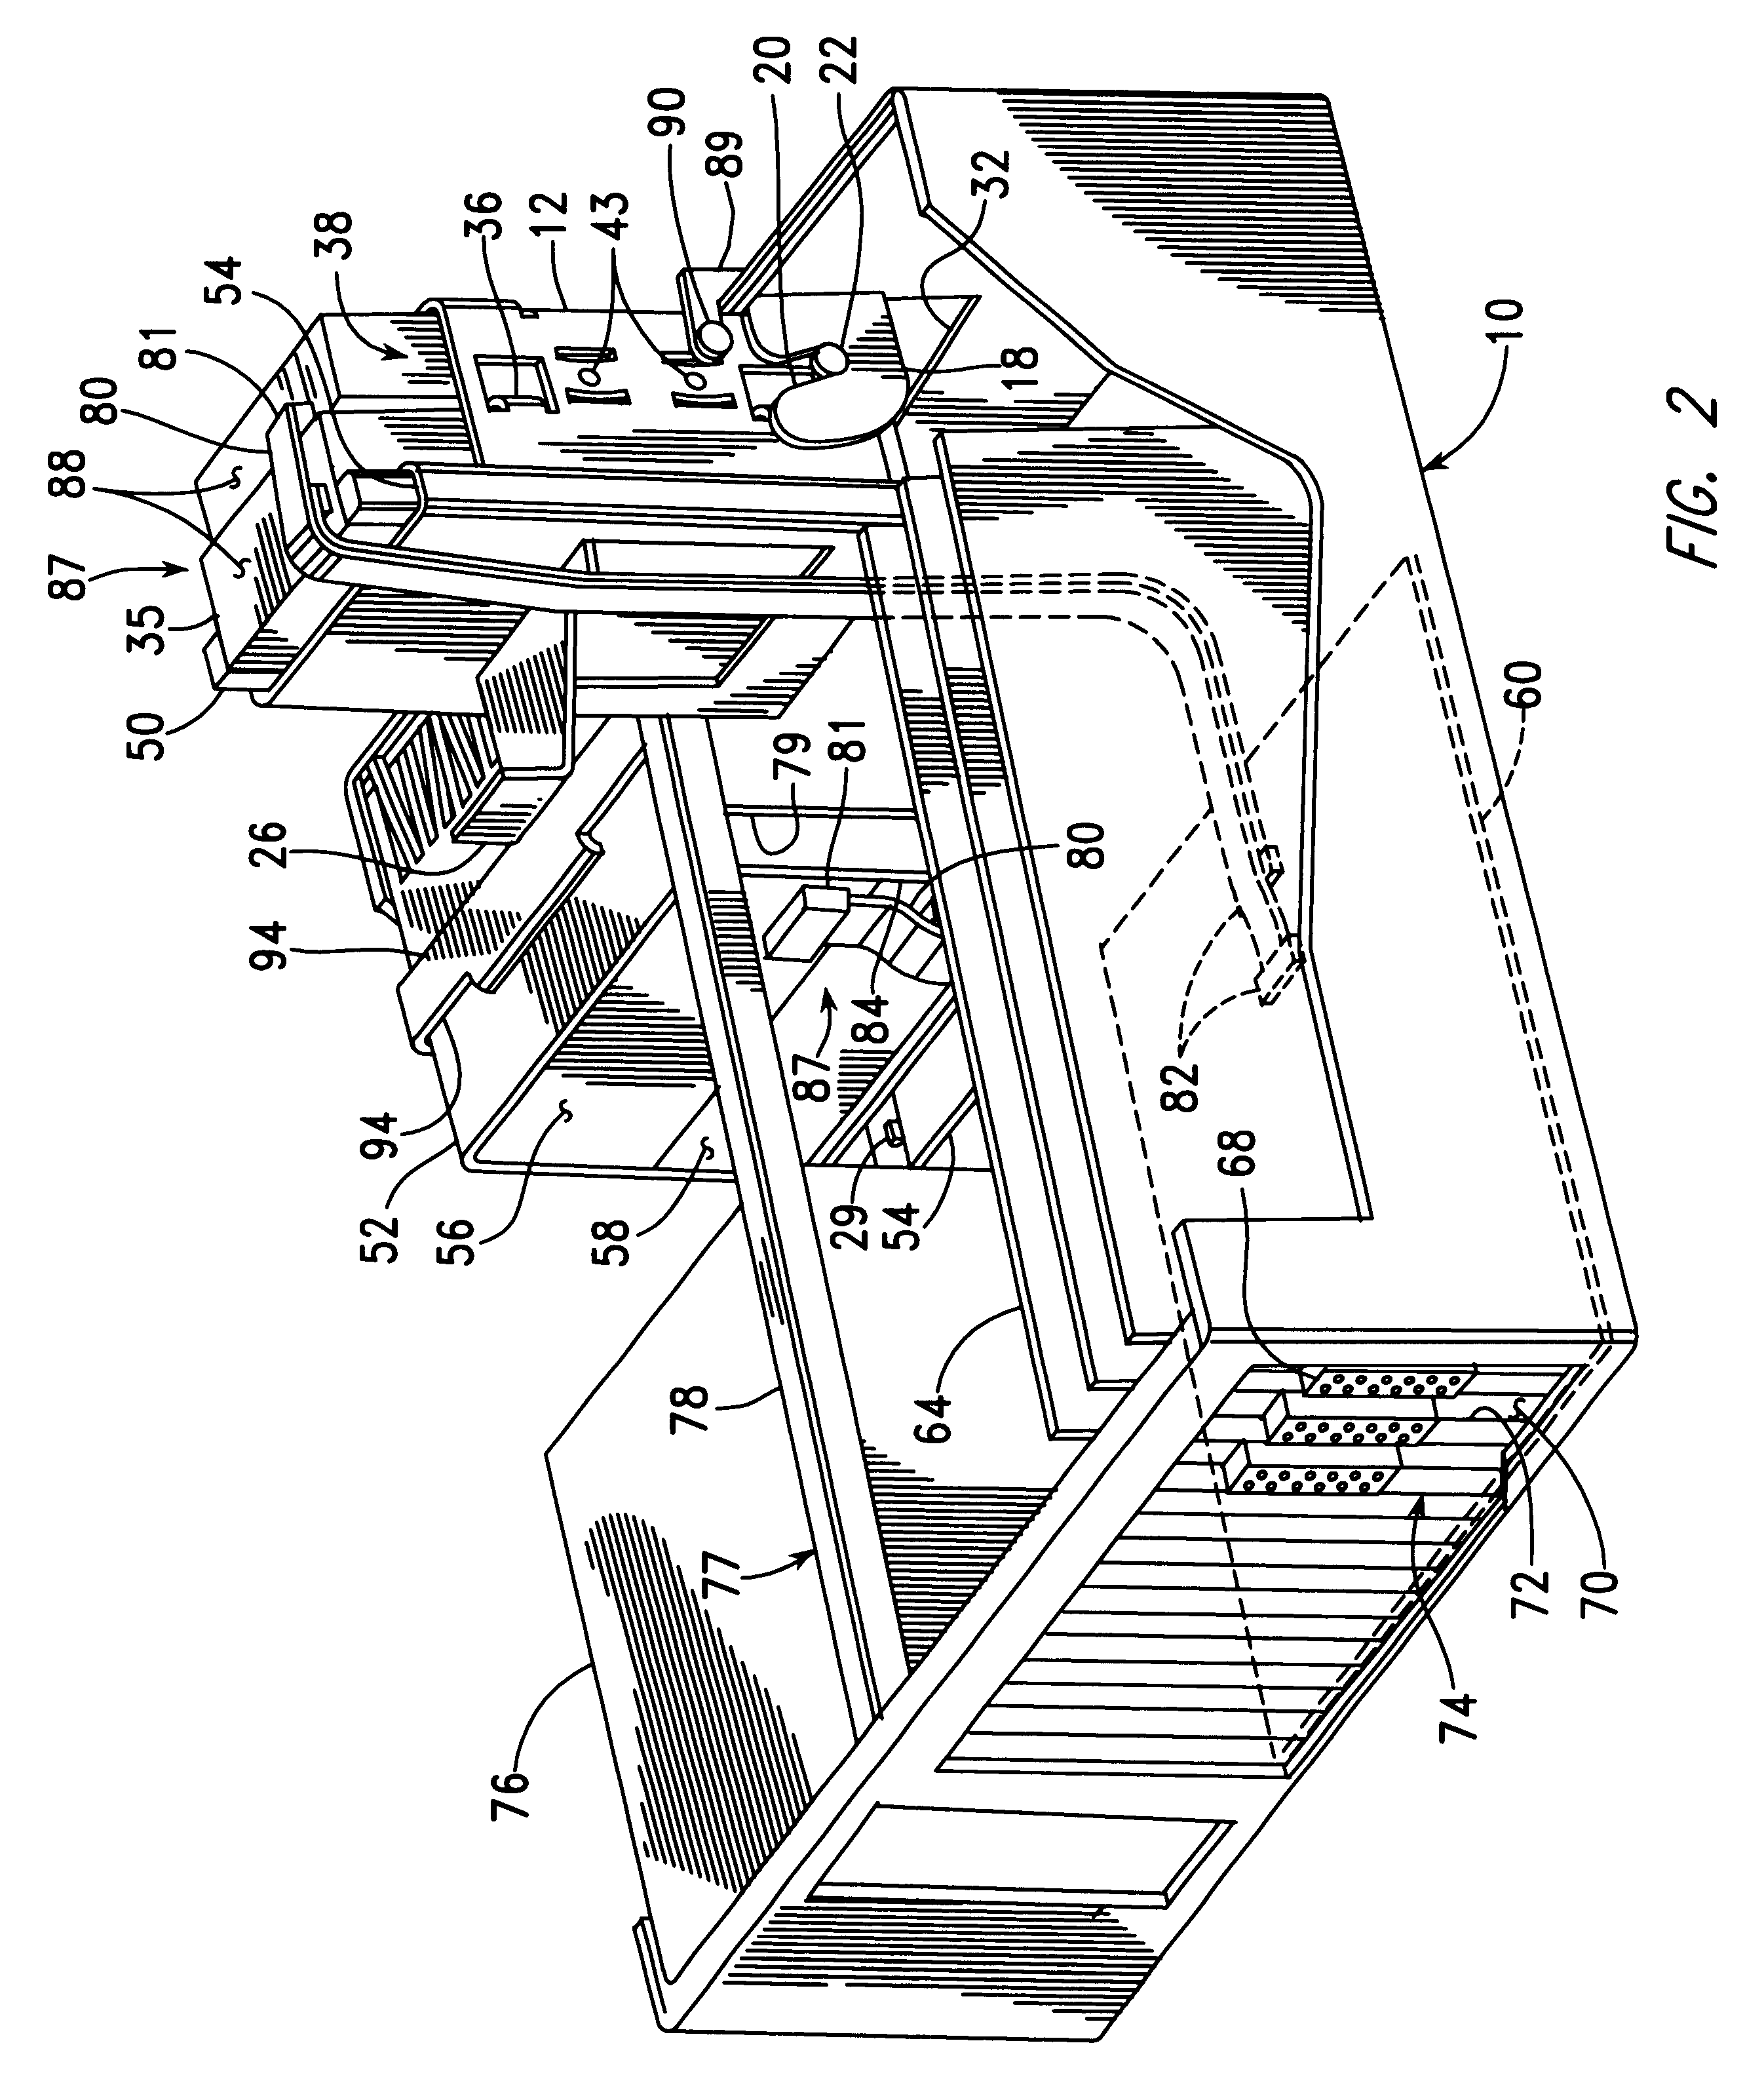 Removable structures for mounting computer drive devices, pivotable between operating and service positions